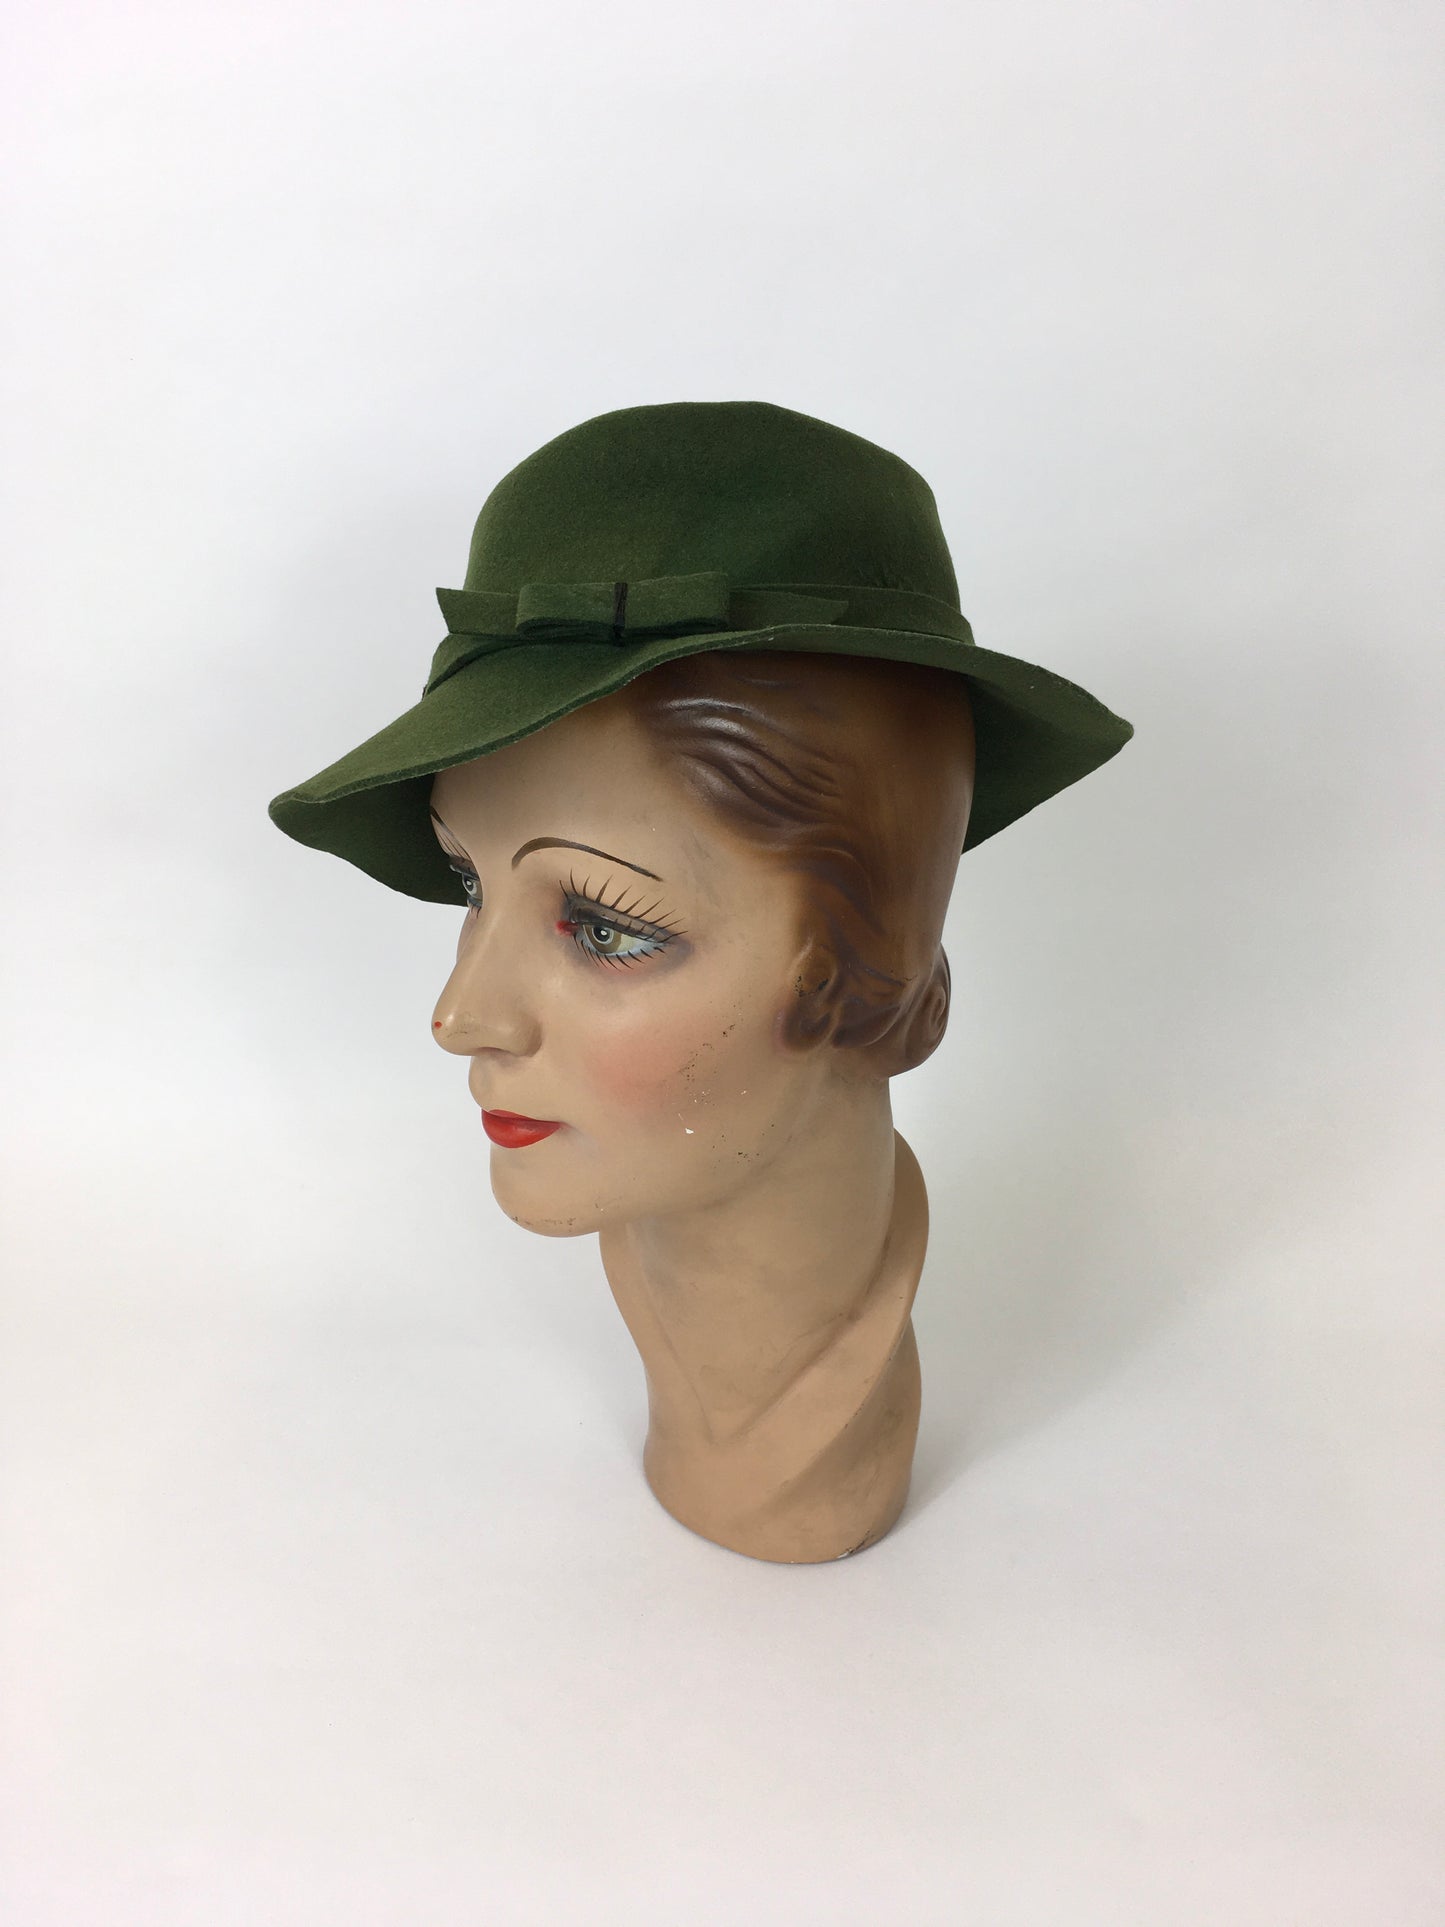 Original Late 1930’s / 1940’s Bottle Green Hat - With Bow and Suede Floral Arrangement